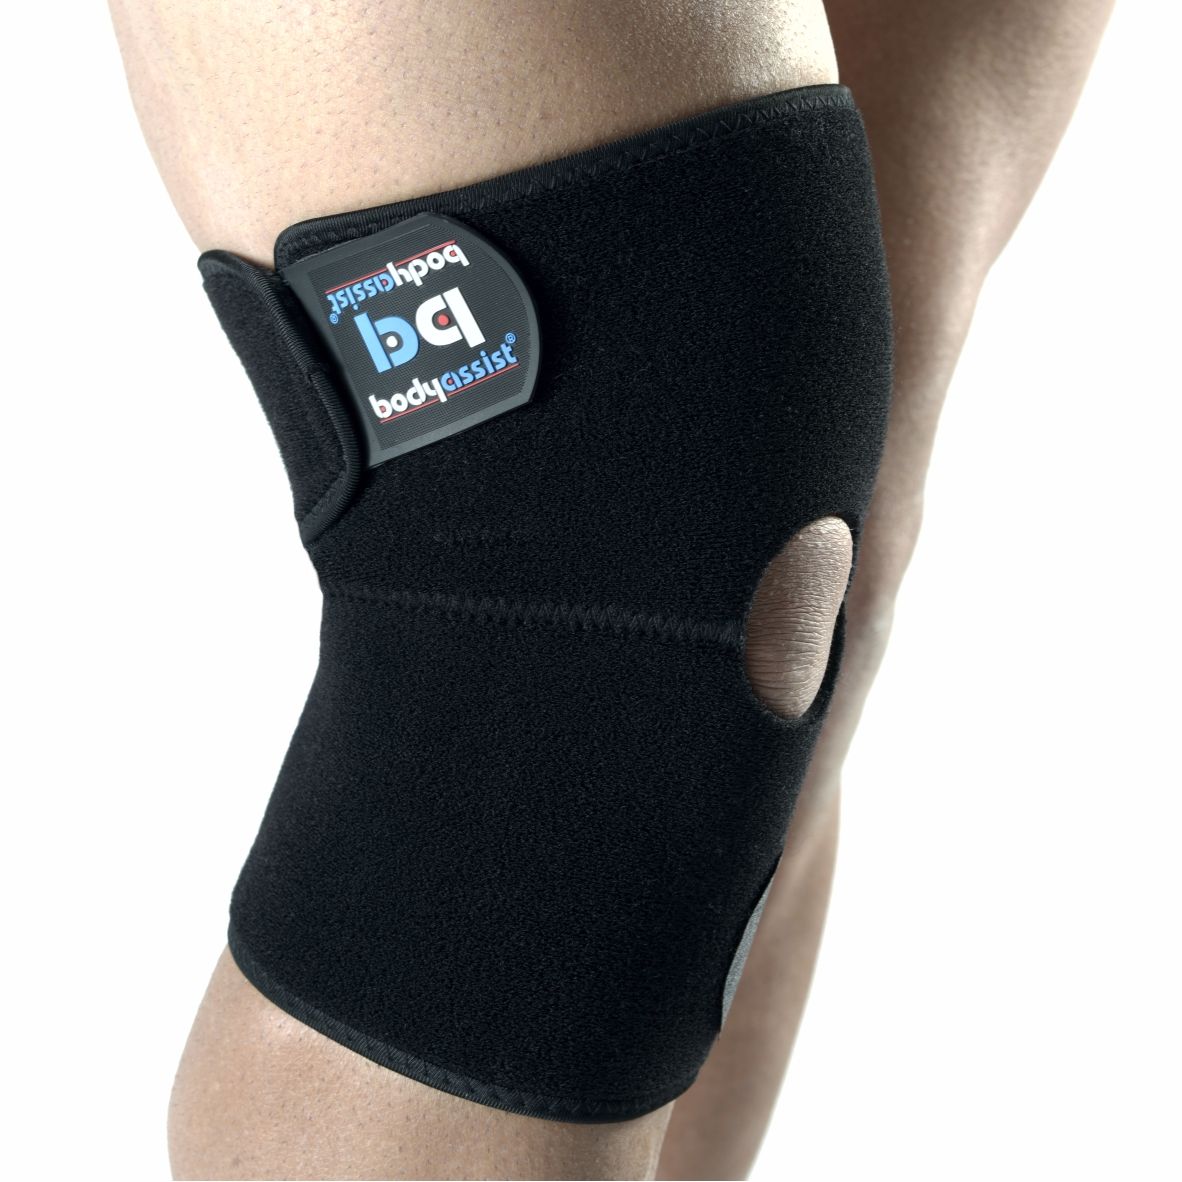 Body Assist 409 thermal knee wrap